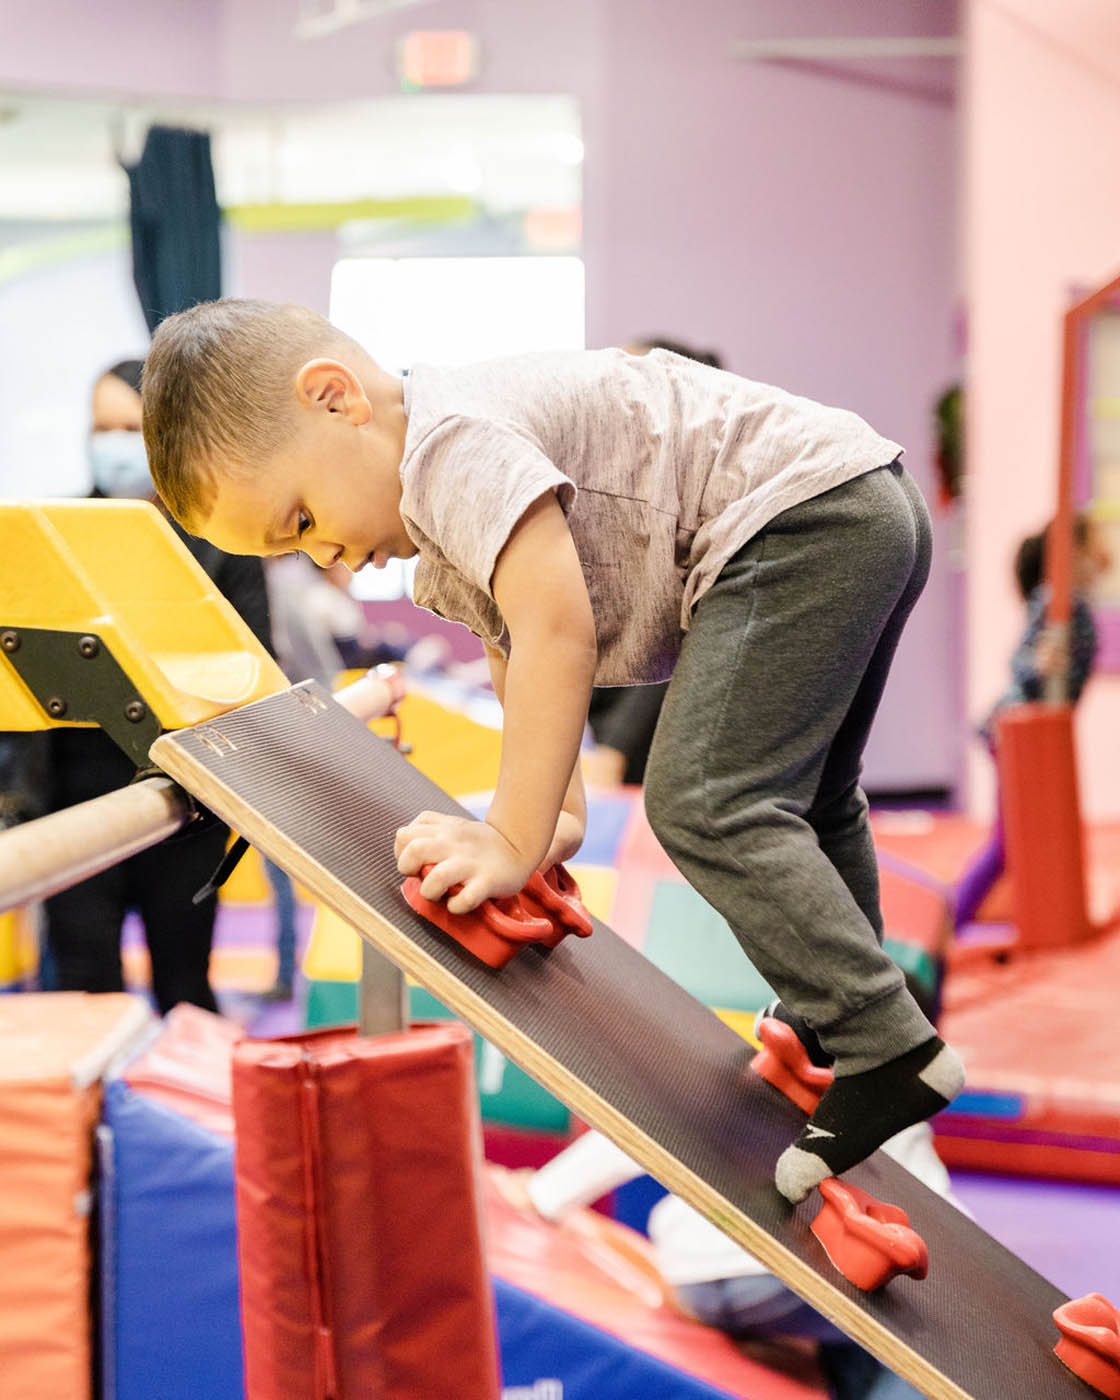 A young boy using a small climbing wall in Romp n' Roll's gym class.